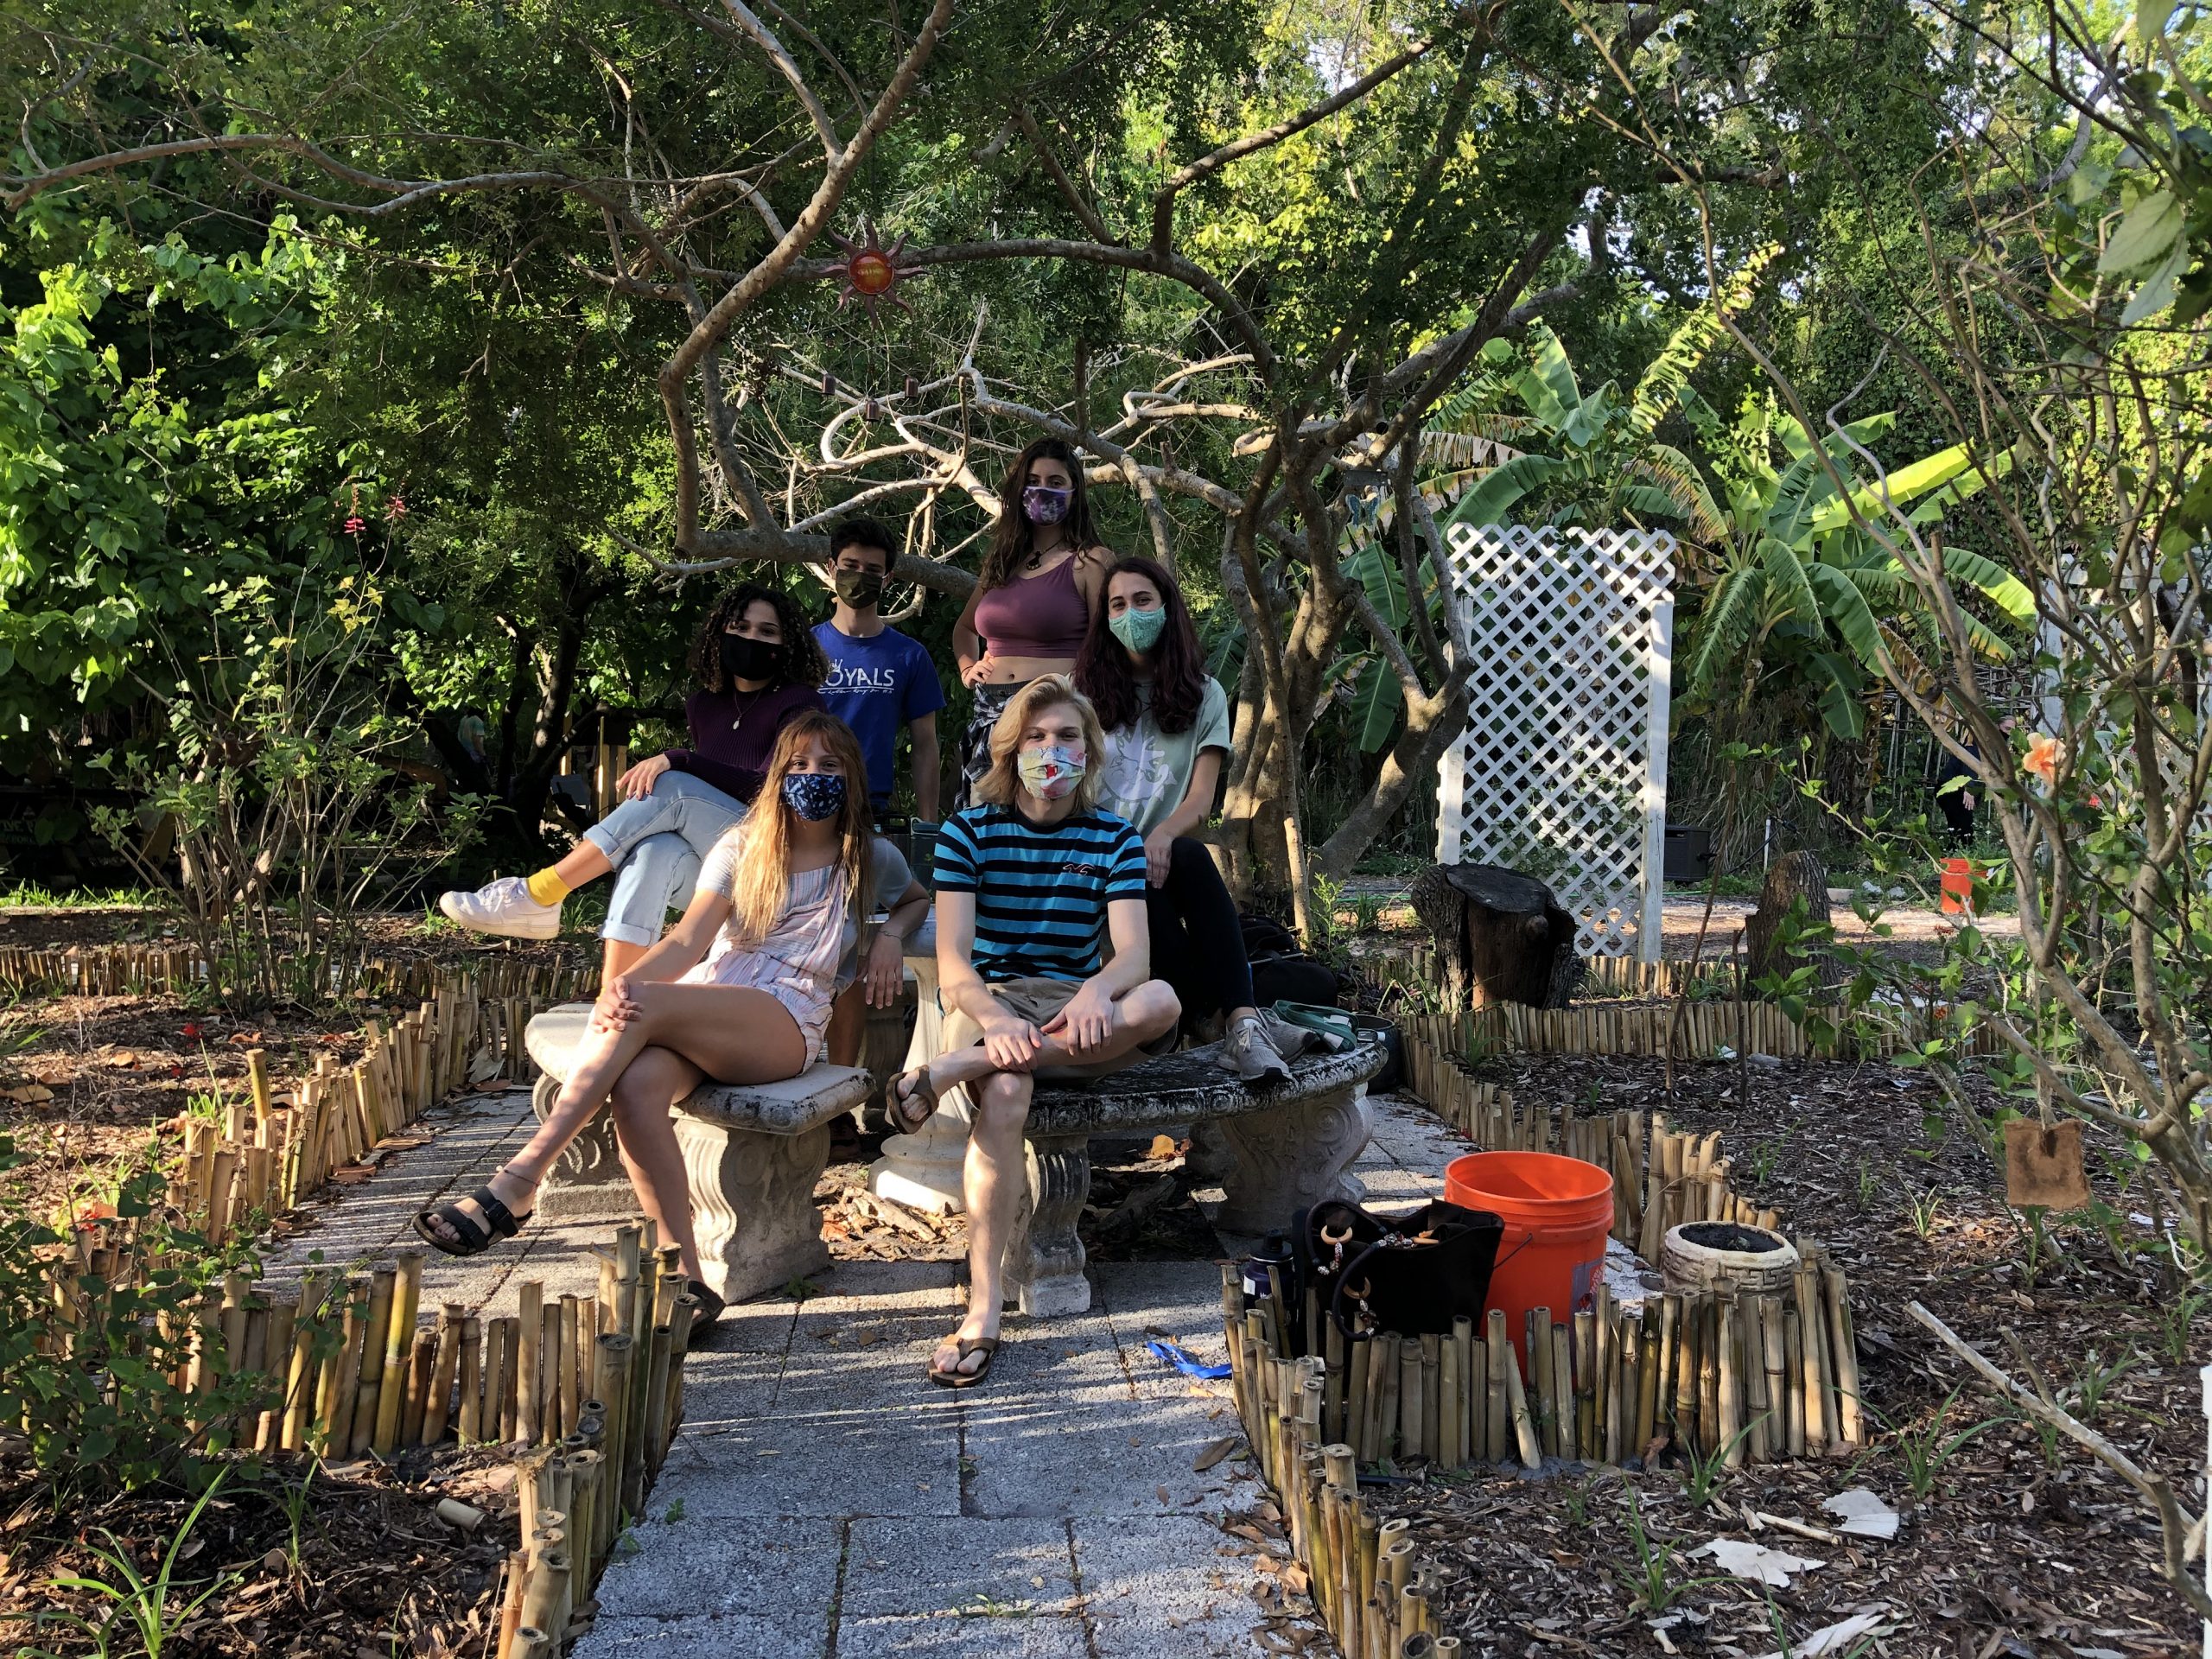 Putting the “fly” back in NatiMediFly: five students restore native, medicinal and butterfly-attracting garden